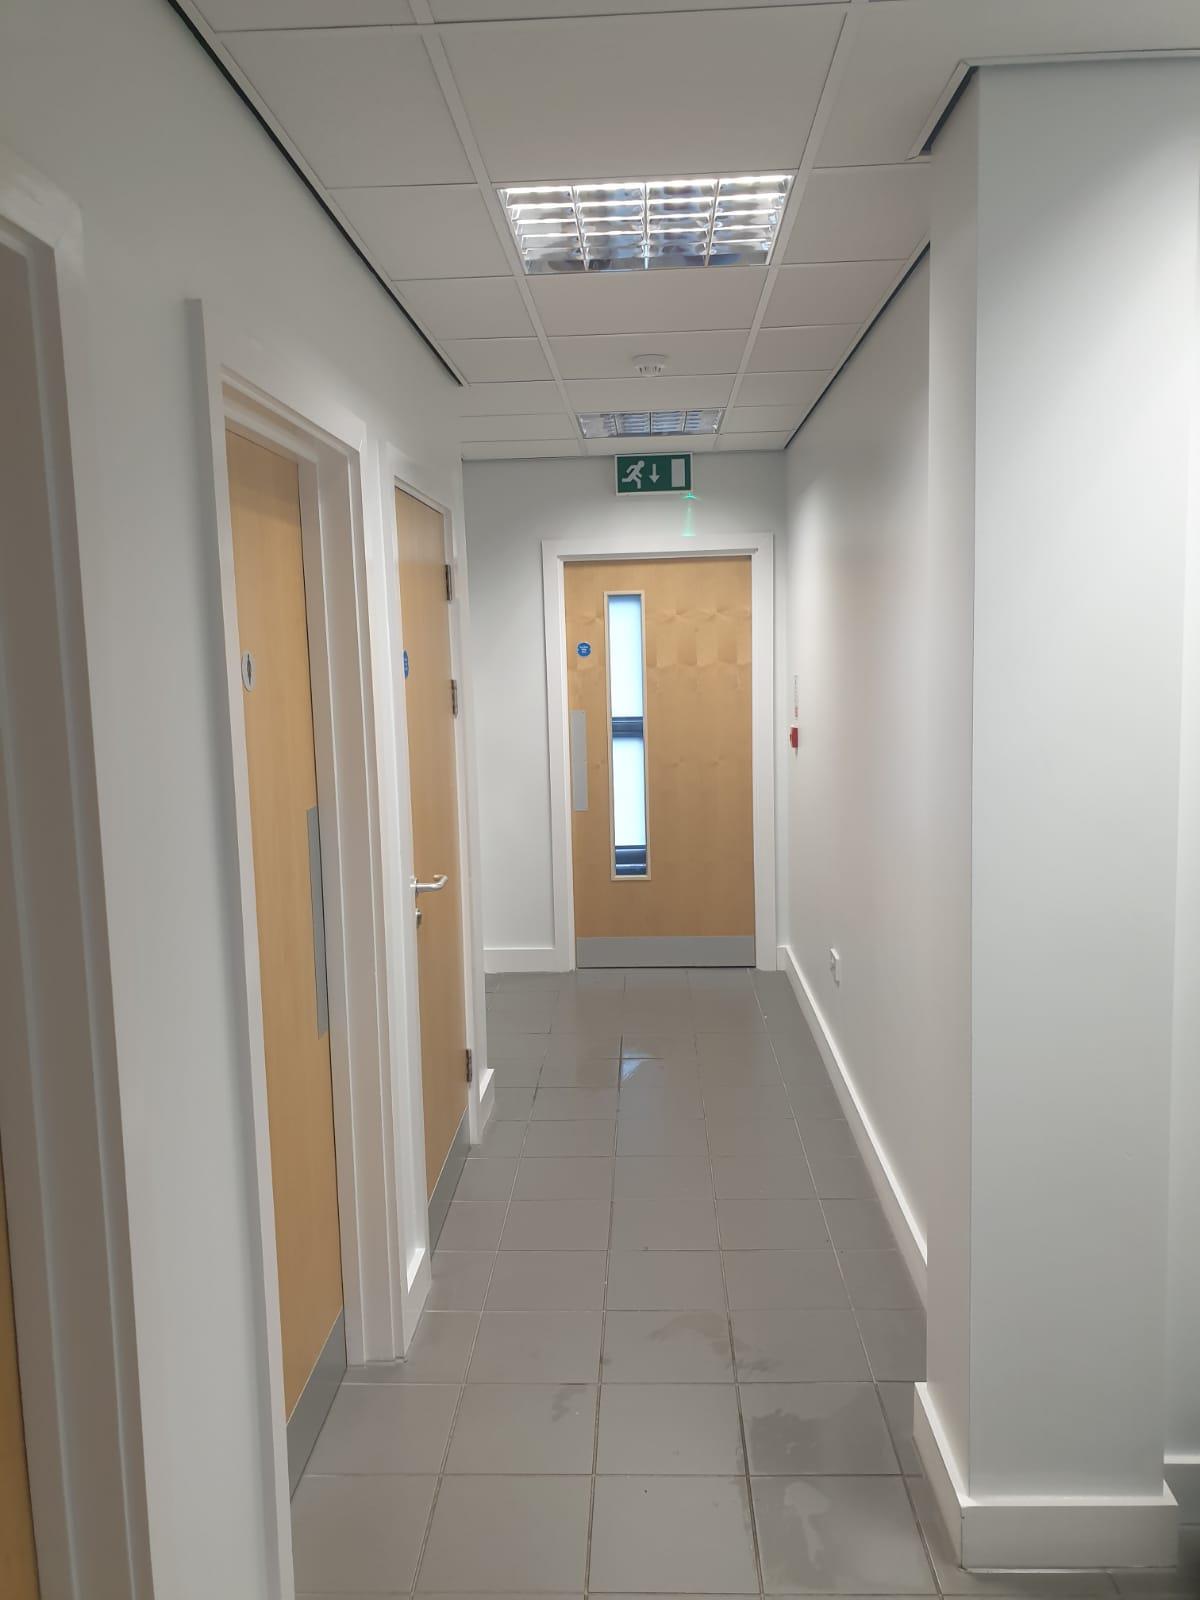 Business Offices, Reception, Stairways and Halls